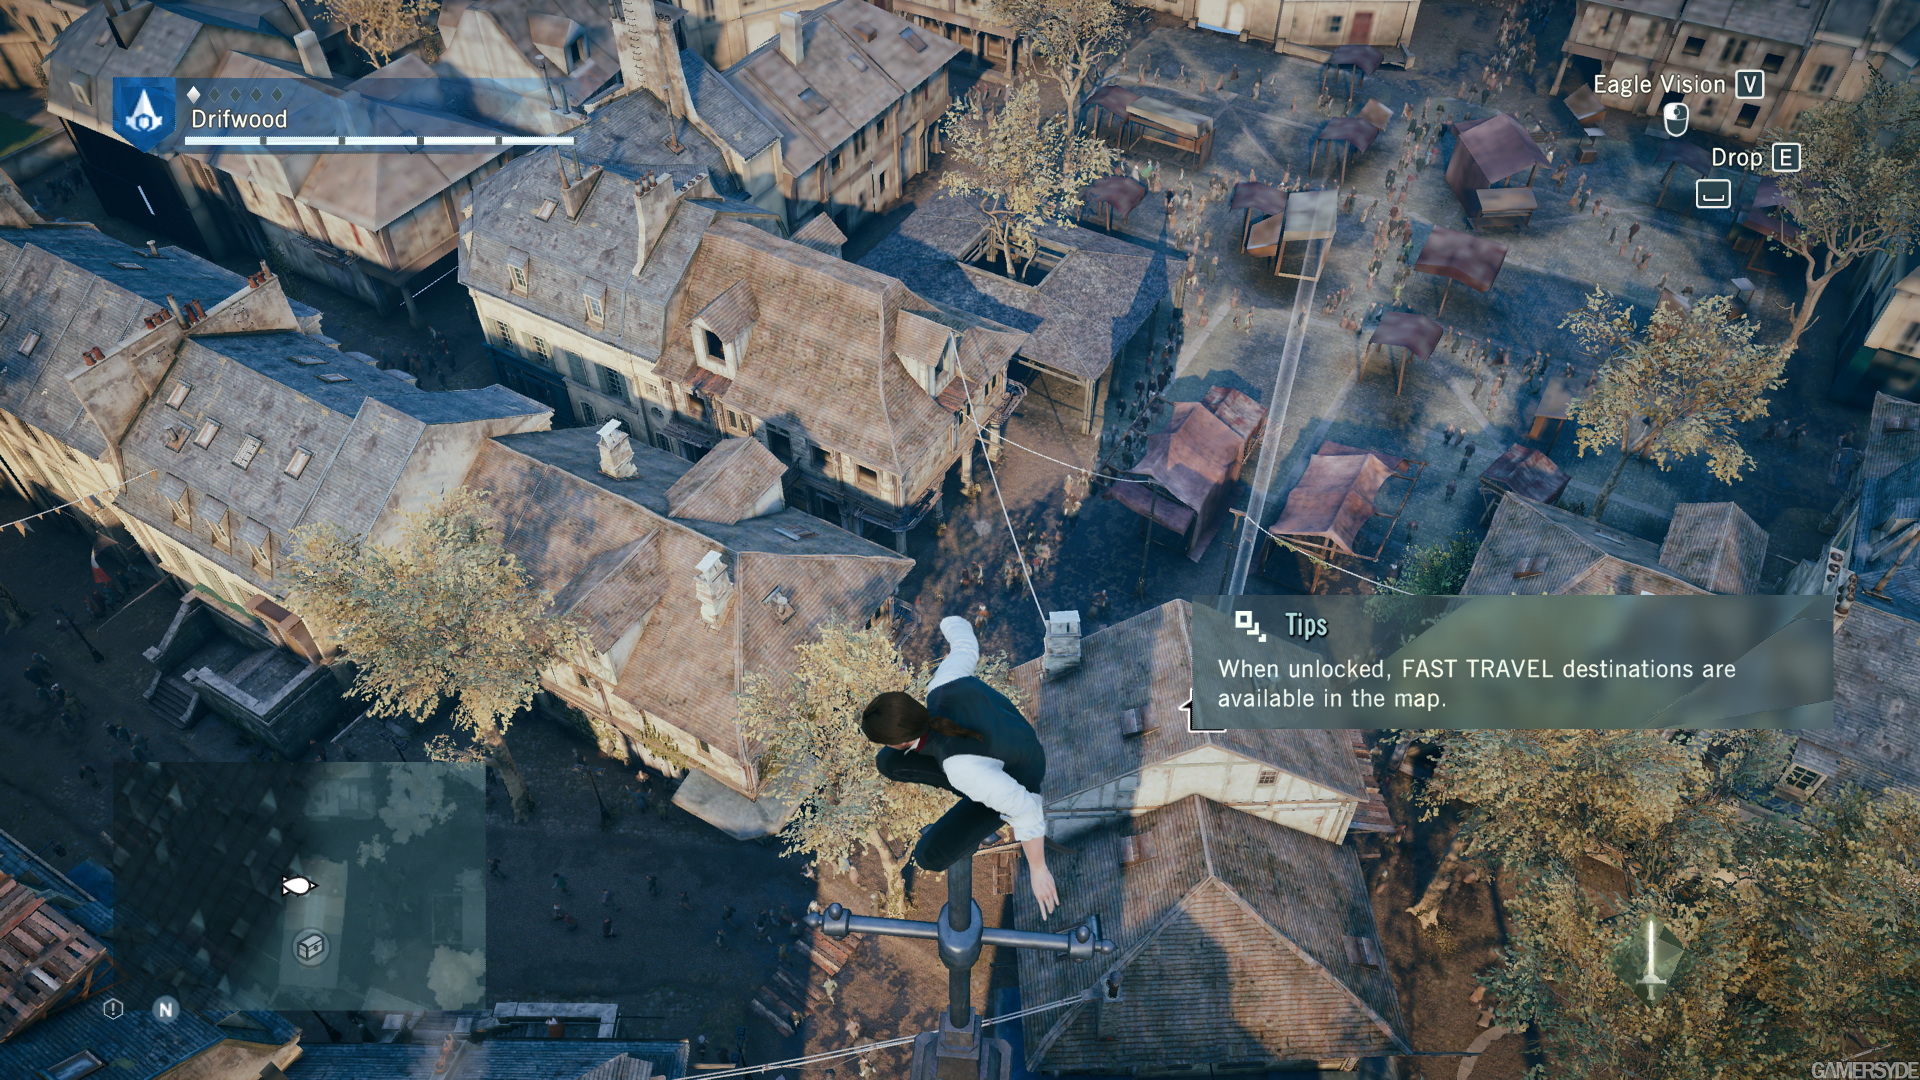 image_assassin_s_creed_unity-26919-2908_